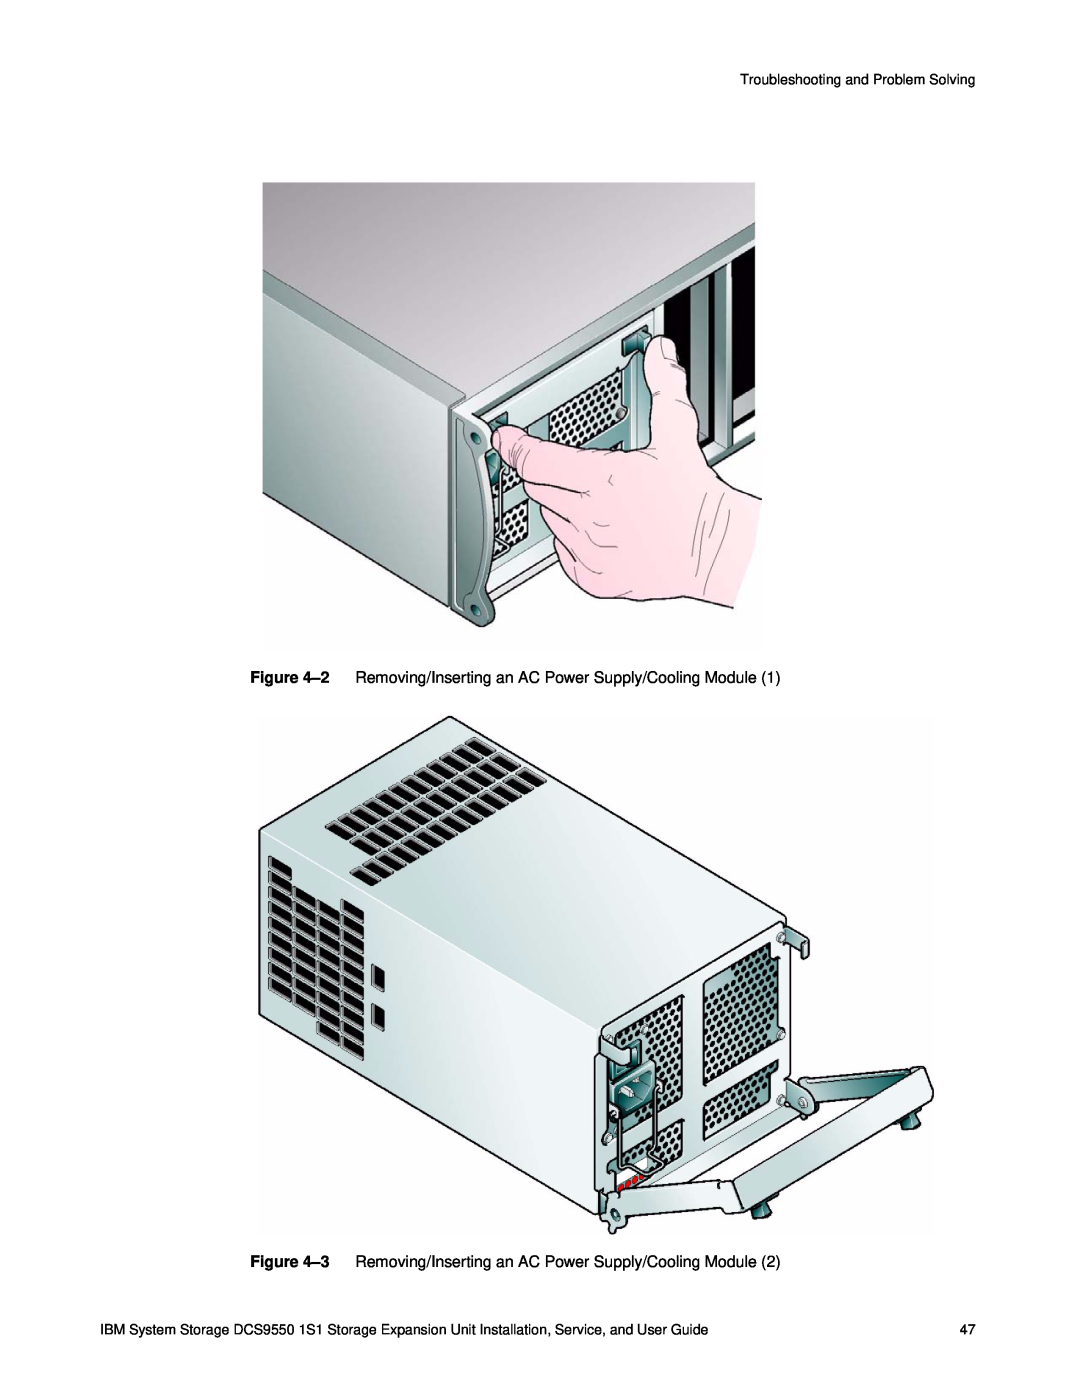 IBM DCS9550 1S1 manual 2 Removing/Inserting an AC Power Supply/Cooling Module, Troubleshooting and Problem Solving 